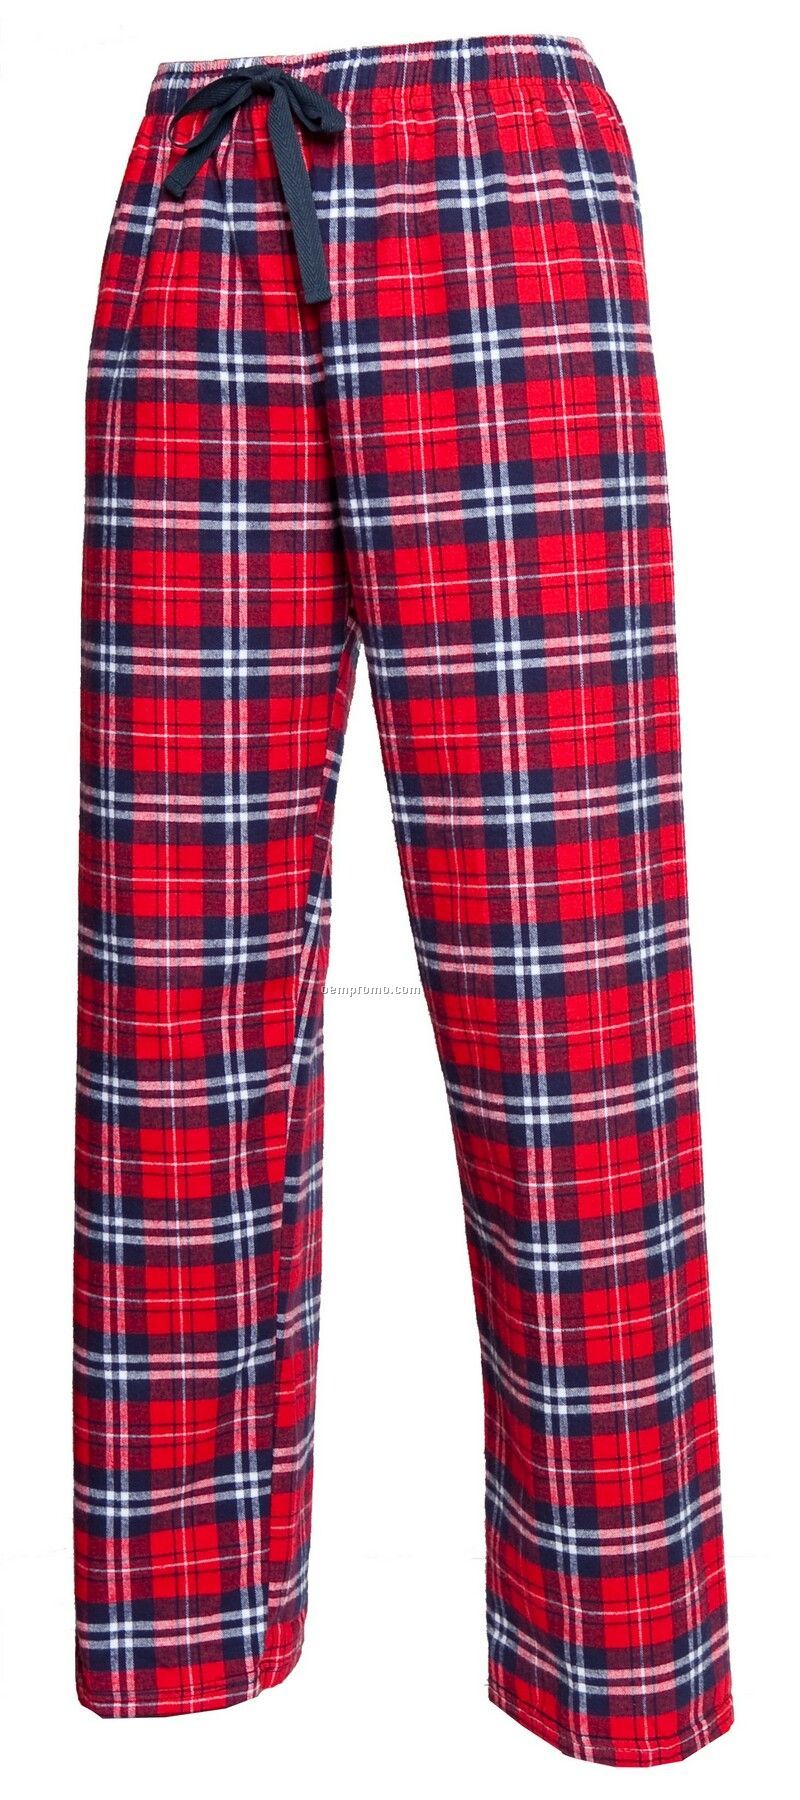 Youth Team Pride Flannel Pant In Navy Blue & Red Plaid